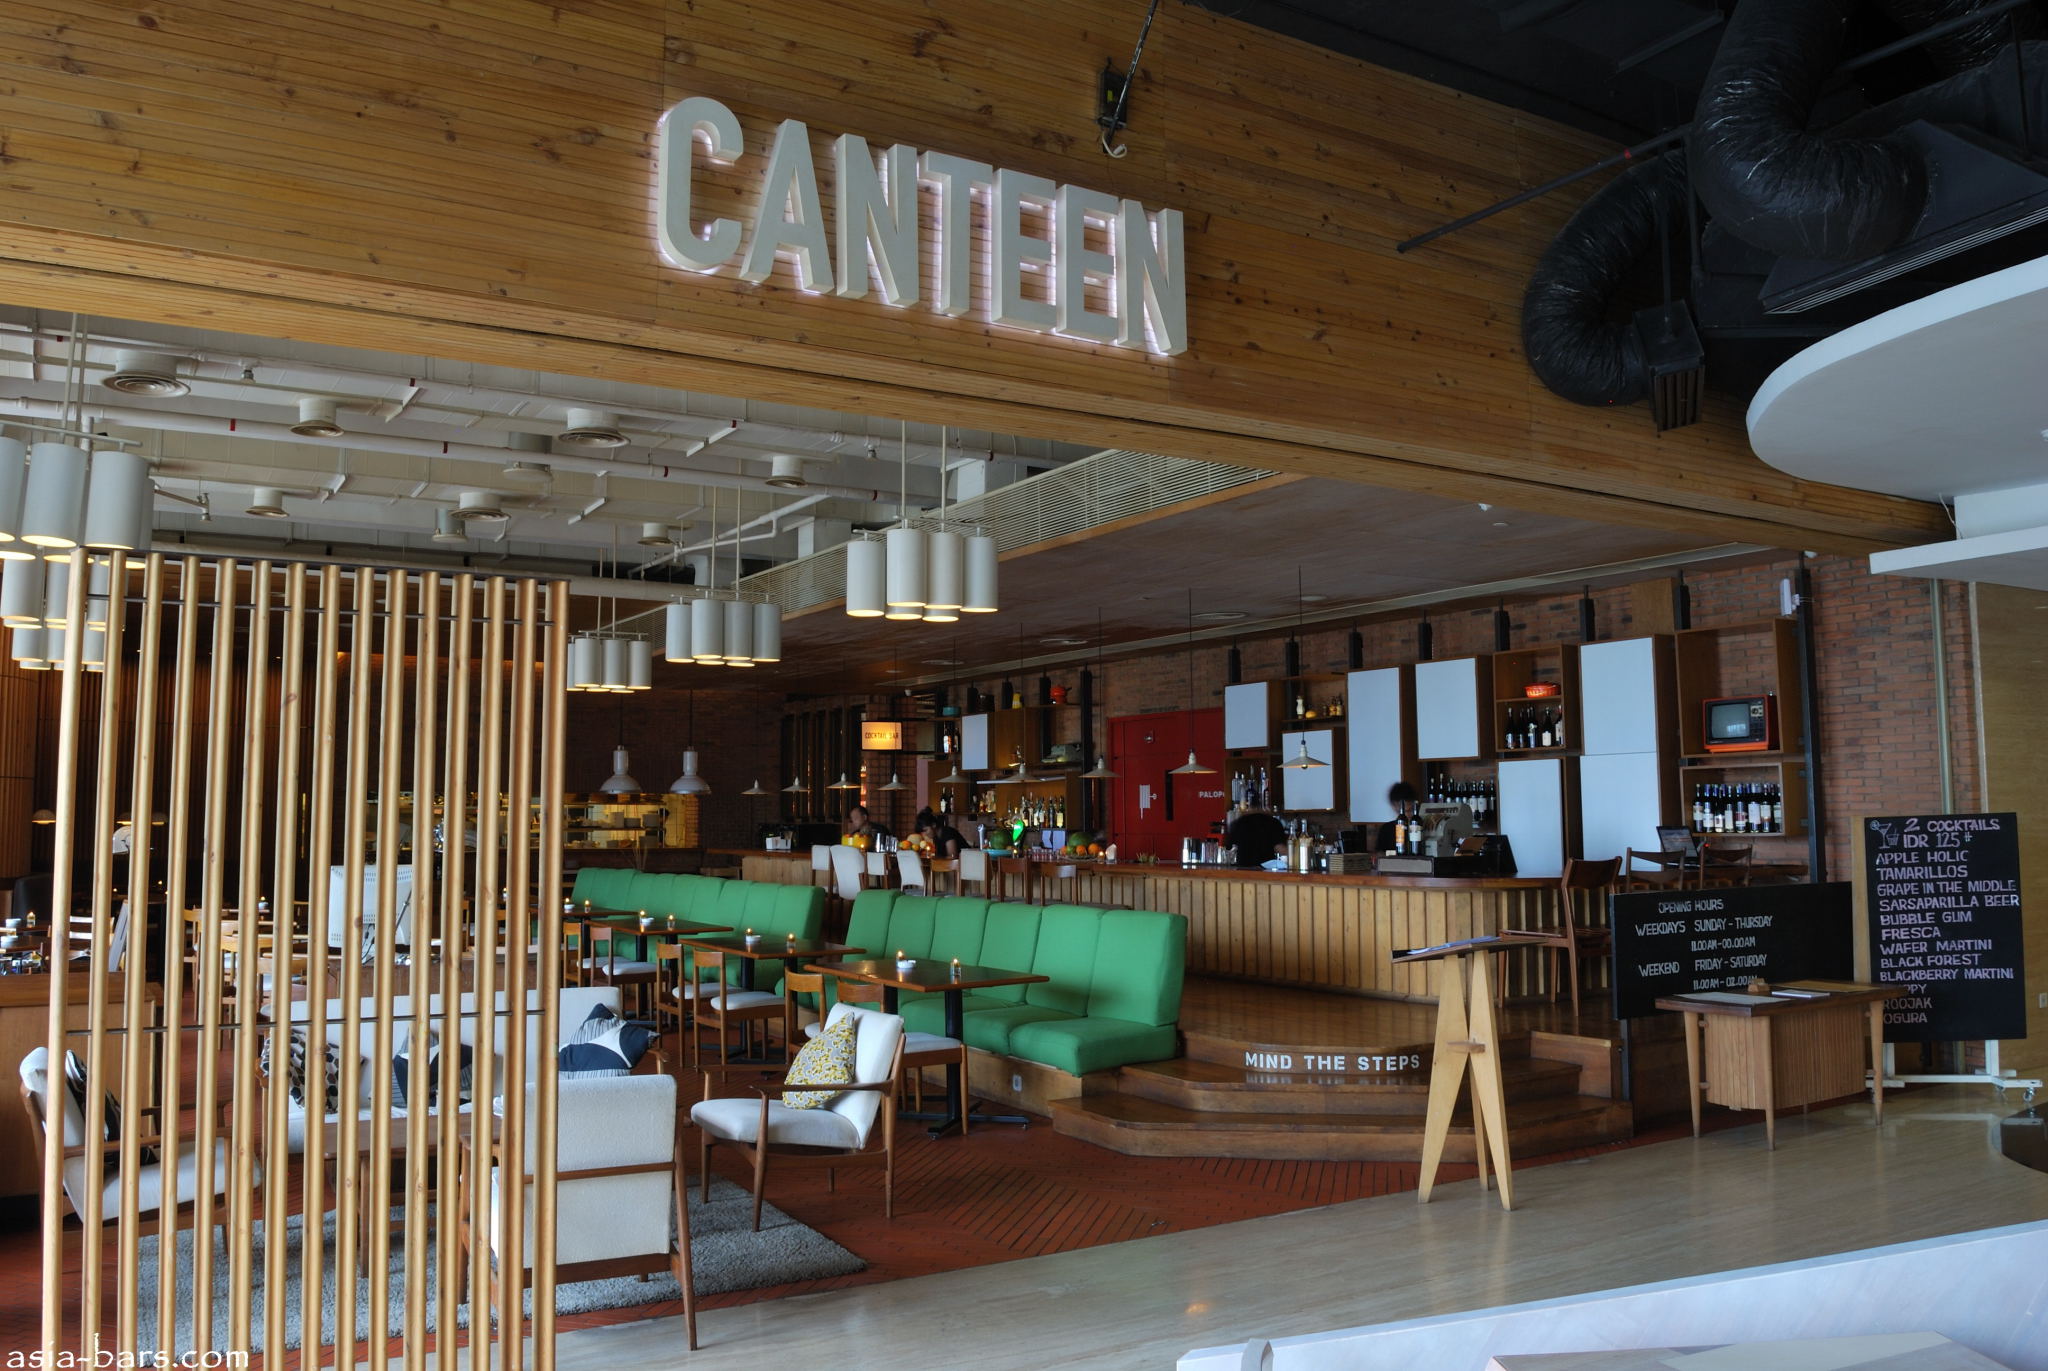 Business Ideas for OFWs: Opening a Canteen